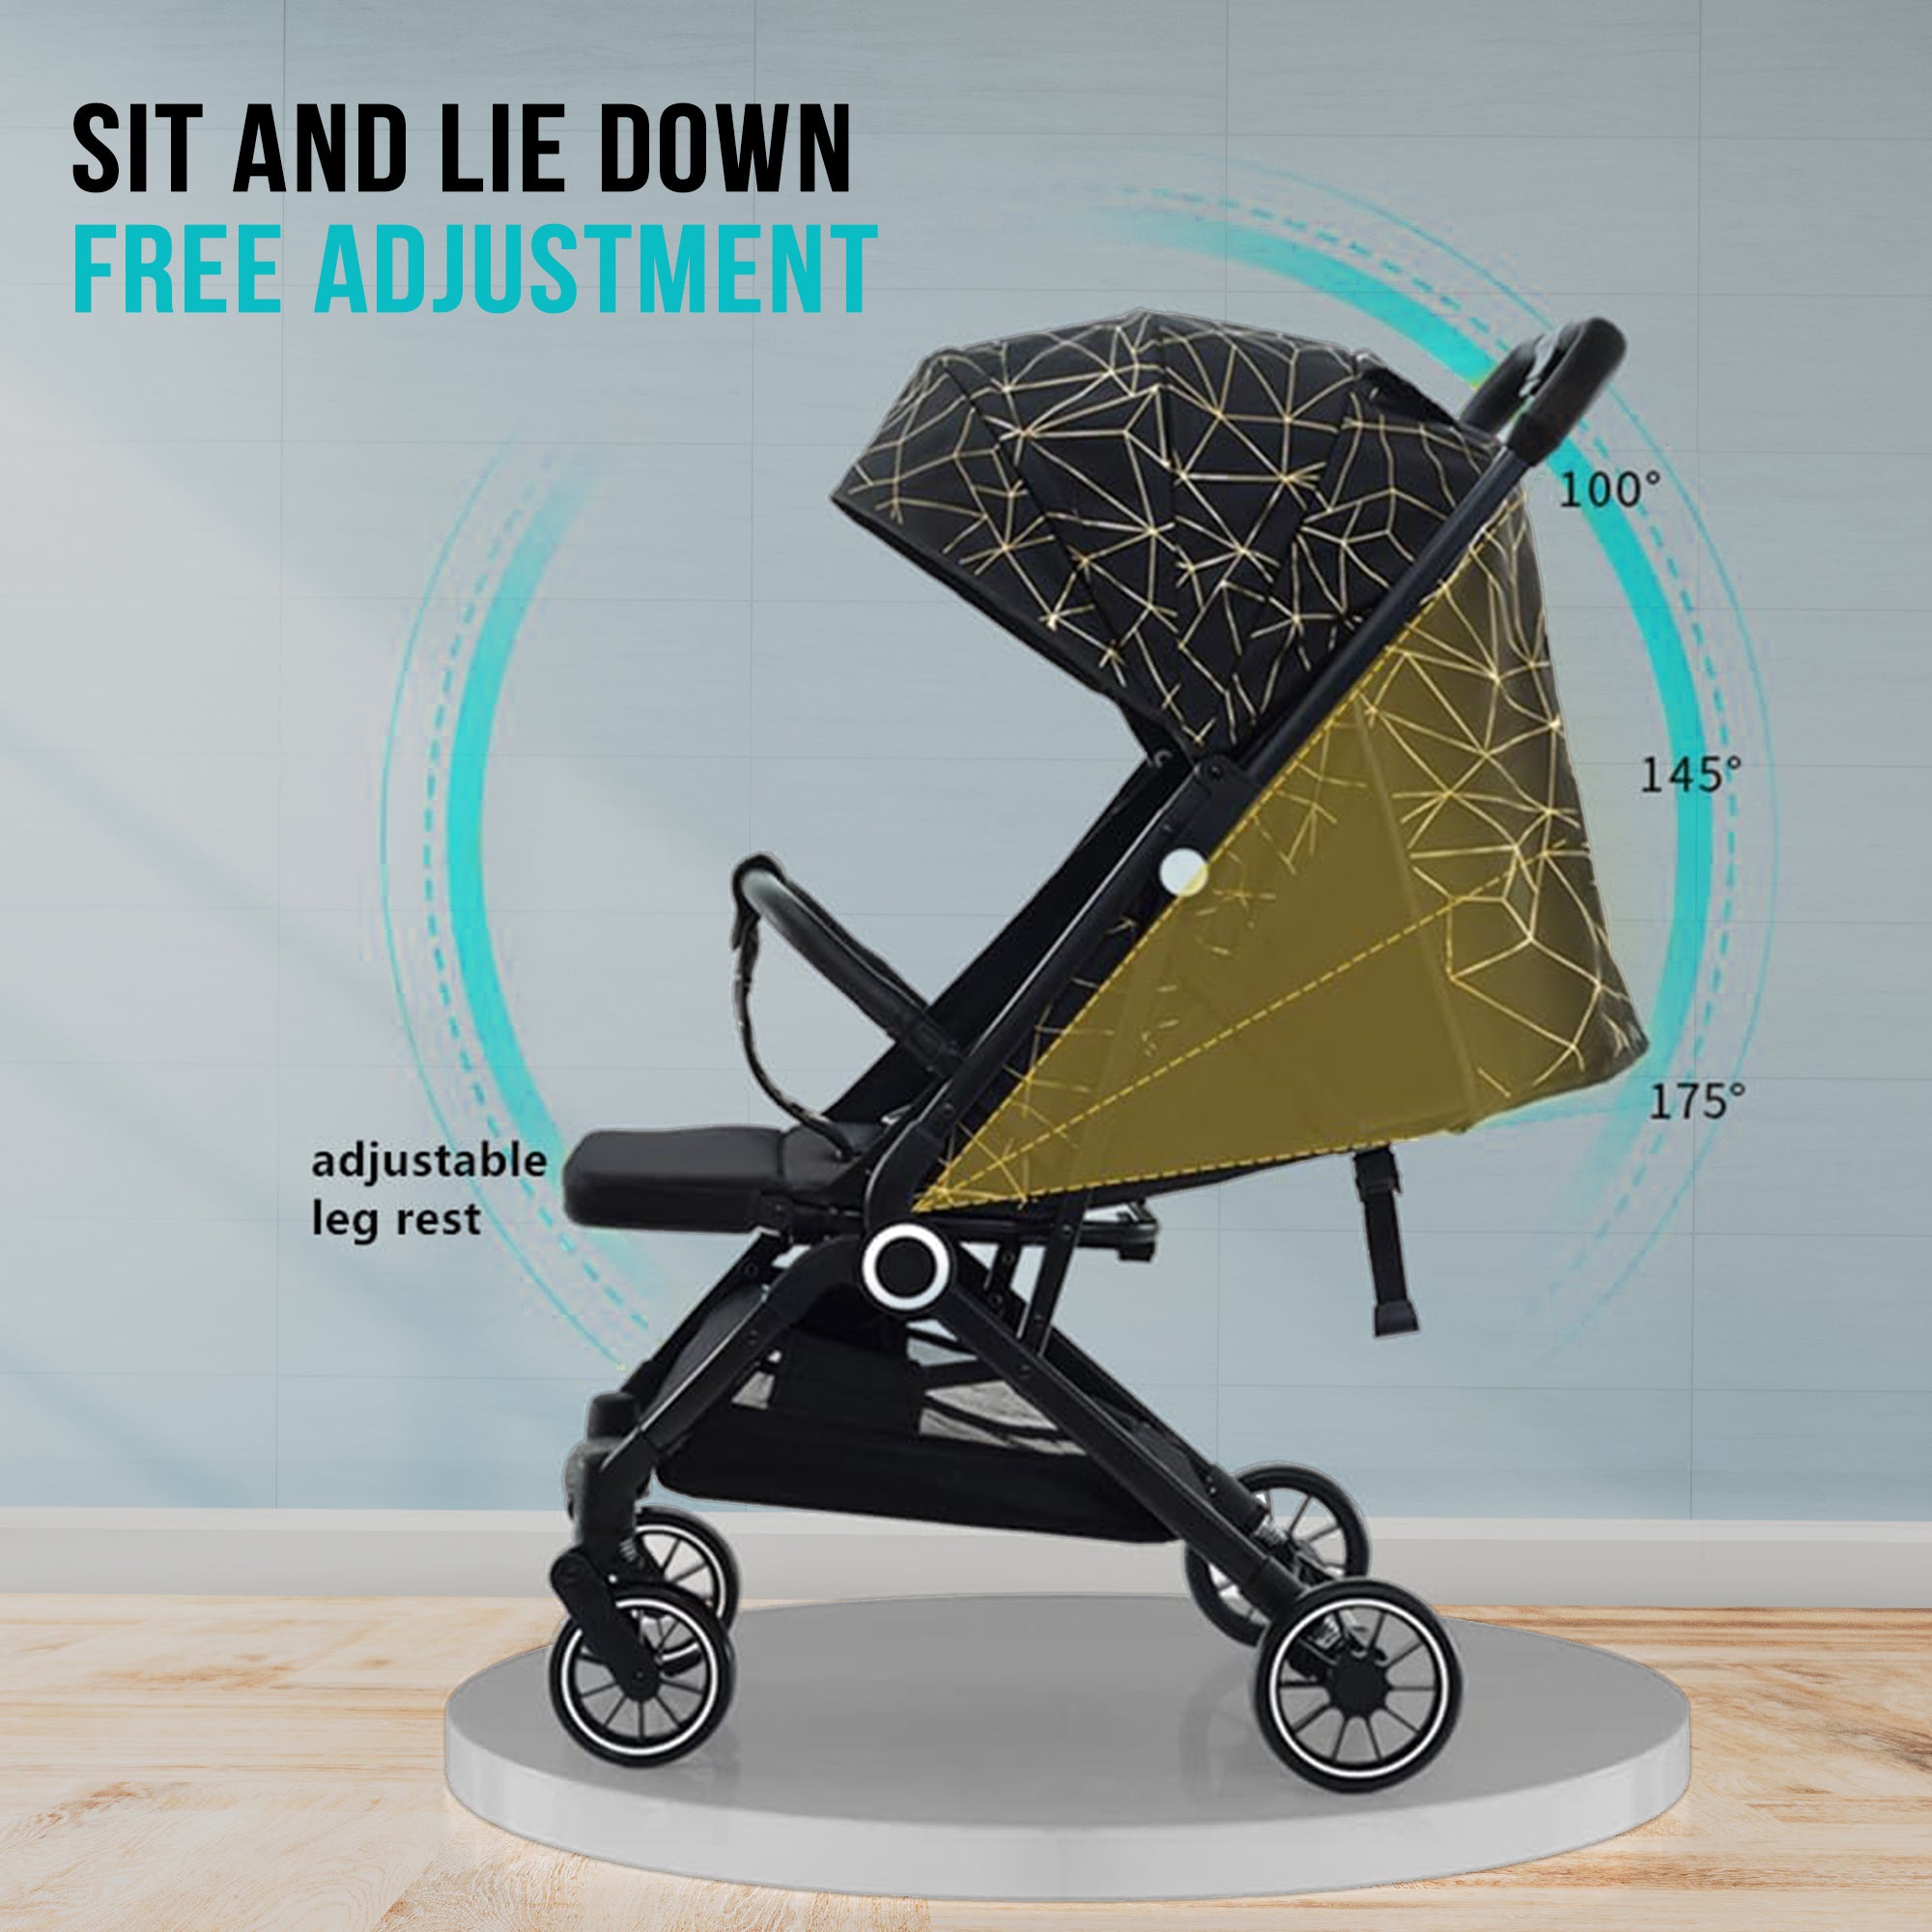 Lightweight Baby Stroller - One-Handed One-Step Fold, Safety Standard, for 0-3 Years